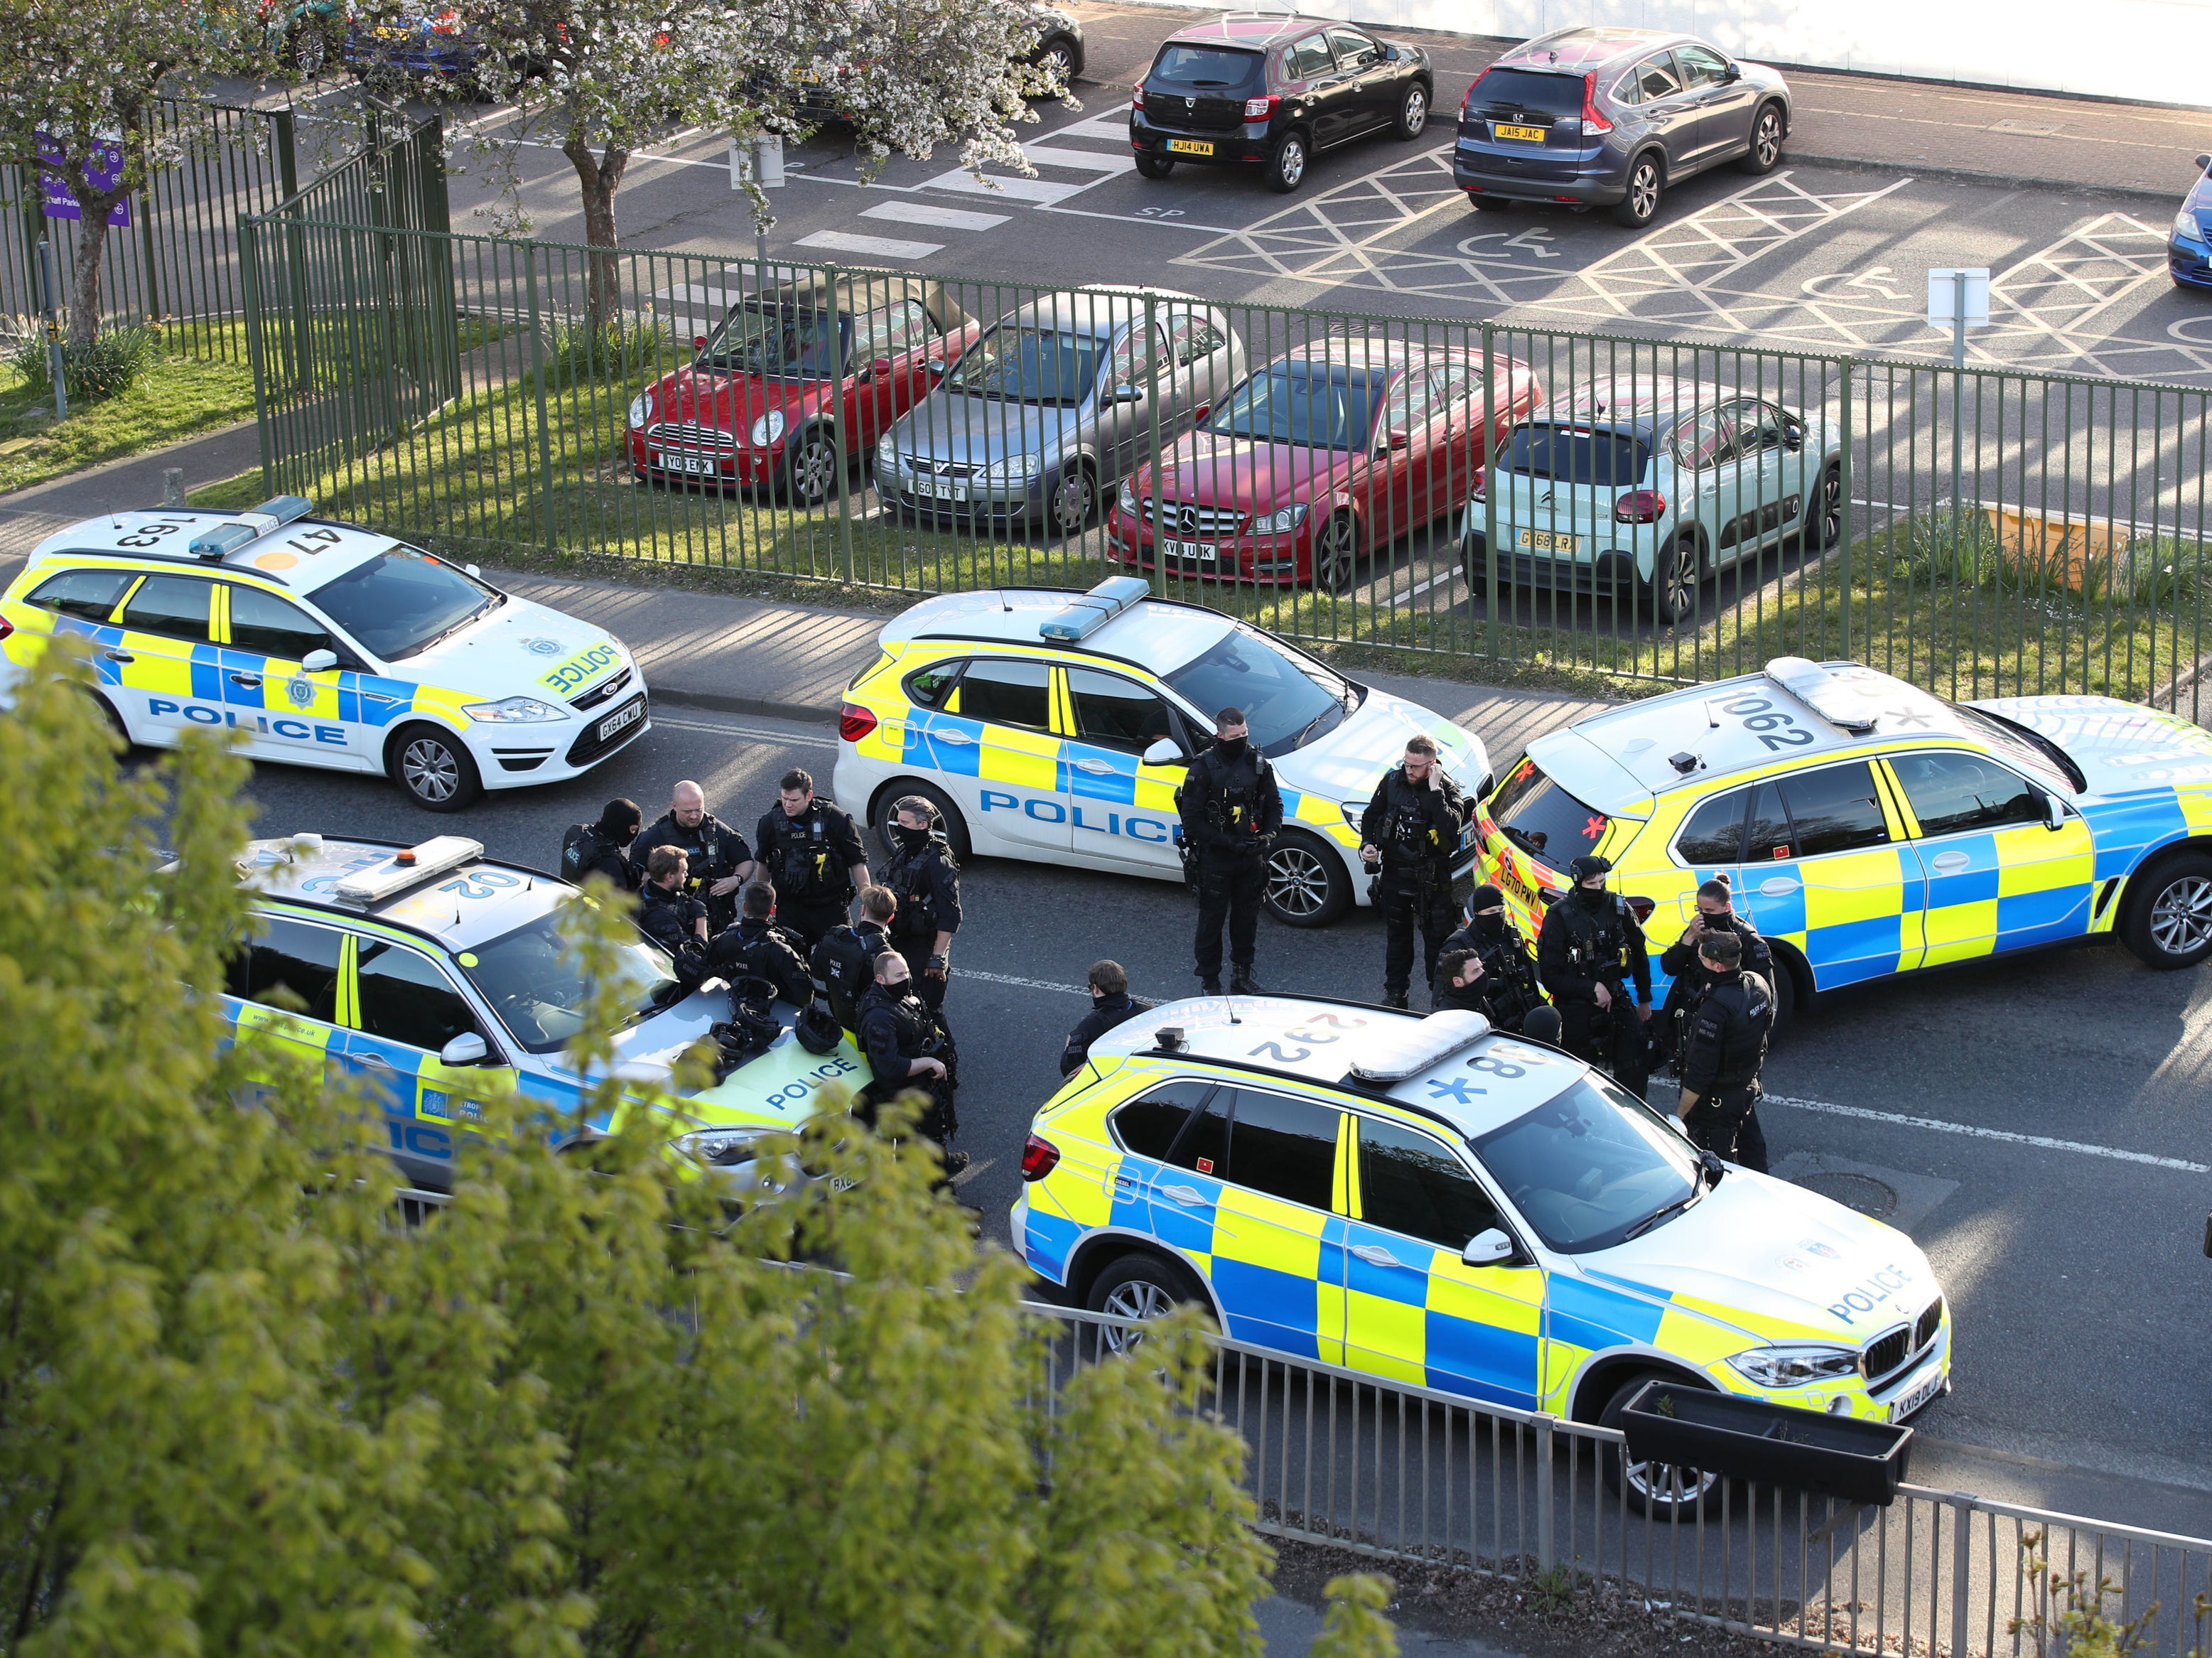 Armed police at Crawley College, Crawley, West Sussex, following "reports of gunshot fire". A man has been detained at the scene in Crawley and two people have suffered injuries, not believed to be serious, police said